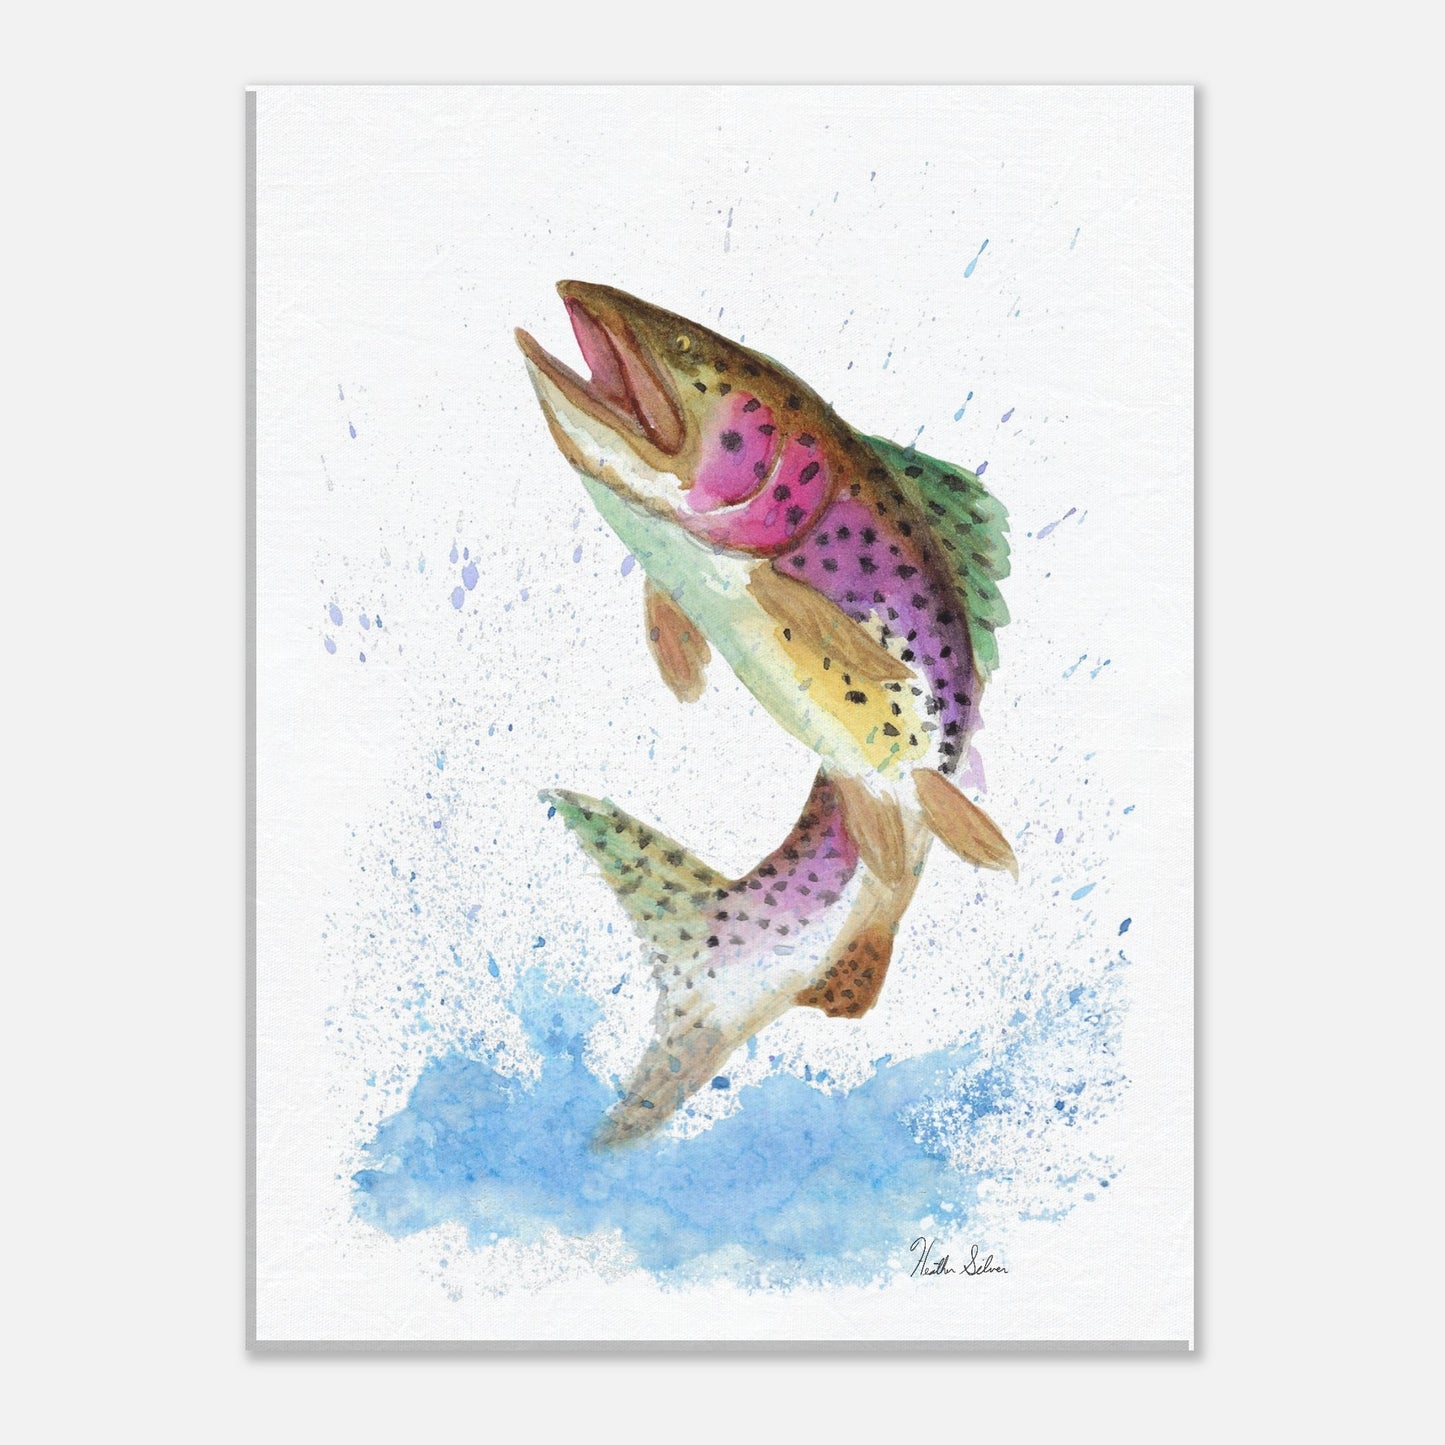 8 by 10 inch slim canvas wall art print featuring a watercolor painting of a rainbow trout leaping from the water. Hanging hardware included.